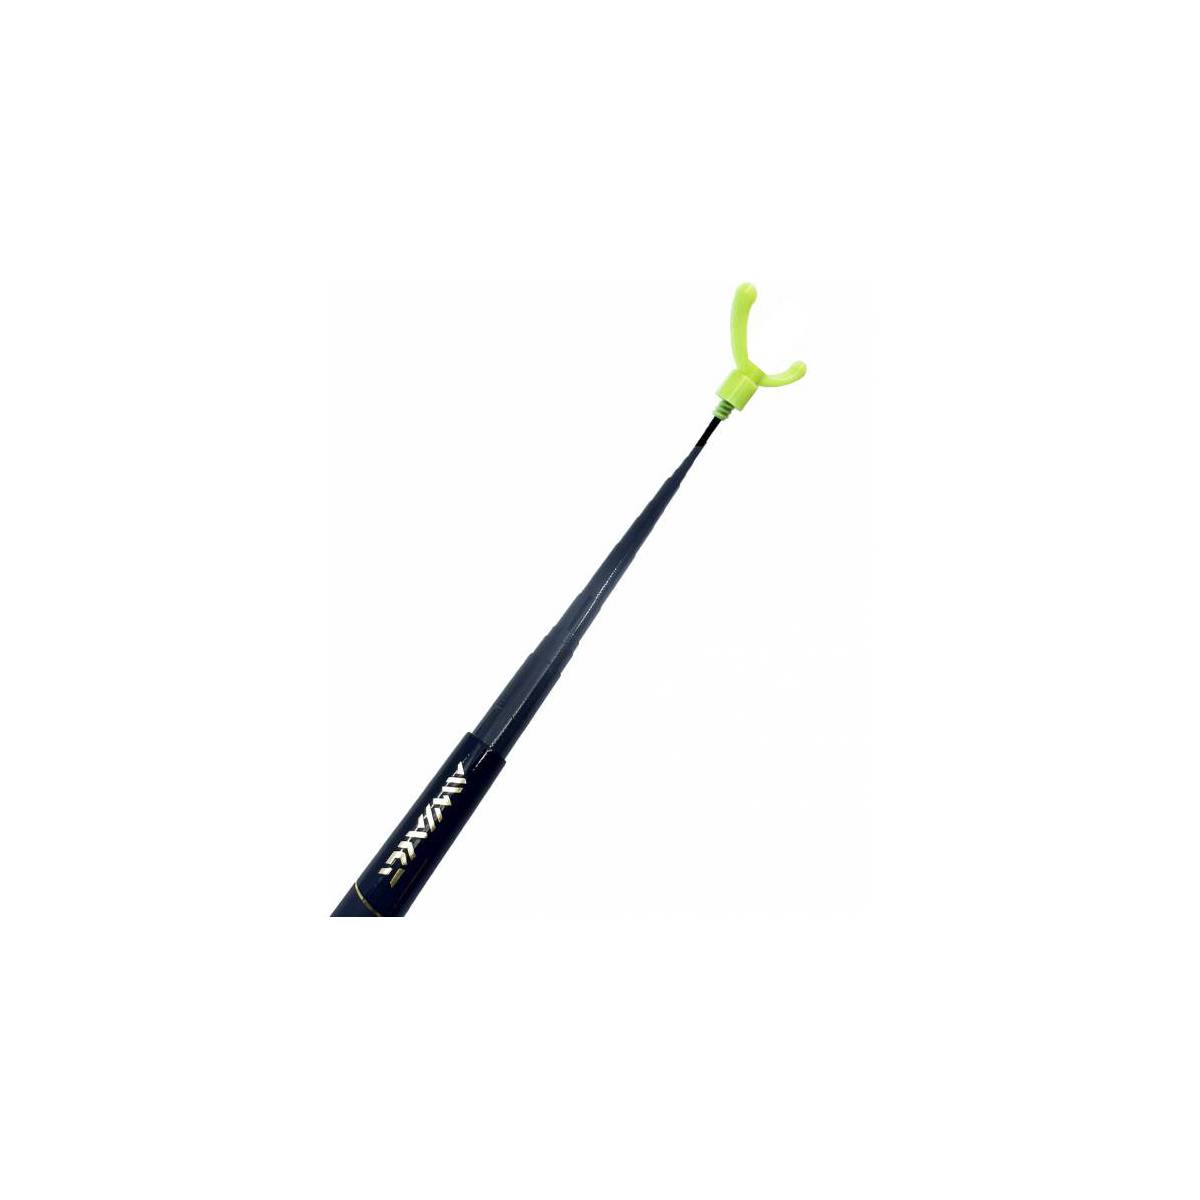 https://cablesformac.com/64032-thickbox_default/telescopic-poleextractor-for-geocaching-in-fiberglass-with-fitted-thread-and-hook-98m.jpg